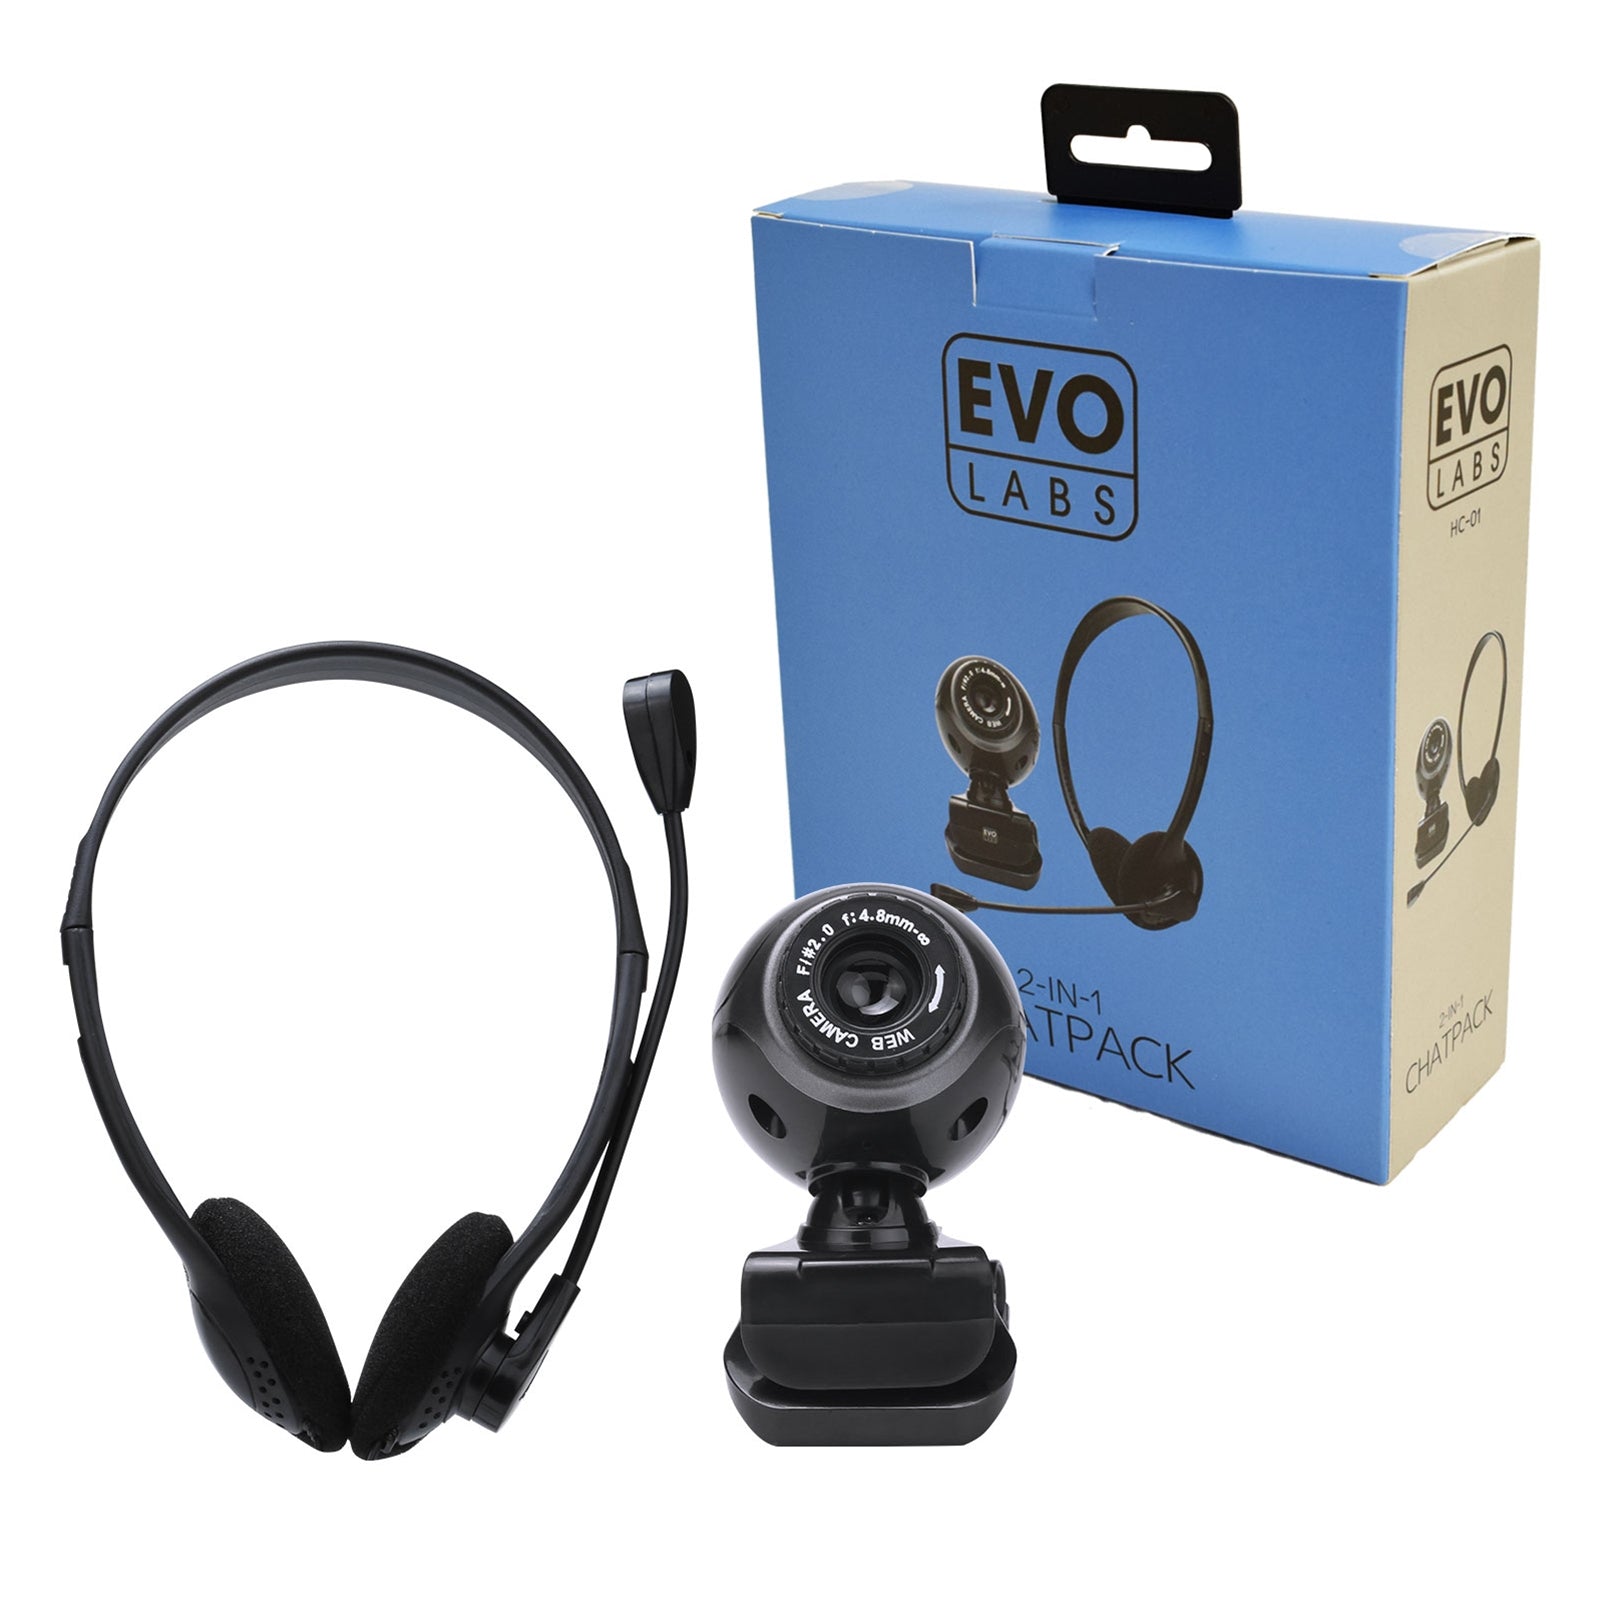 Photos - Other for protection Evo Labs Evo Labs HC-01 Webcam and Headset Chatpack, 640x480, USB 2.0 Webc